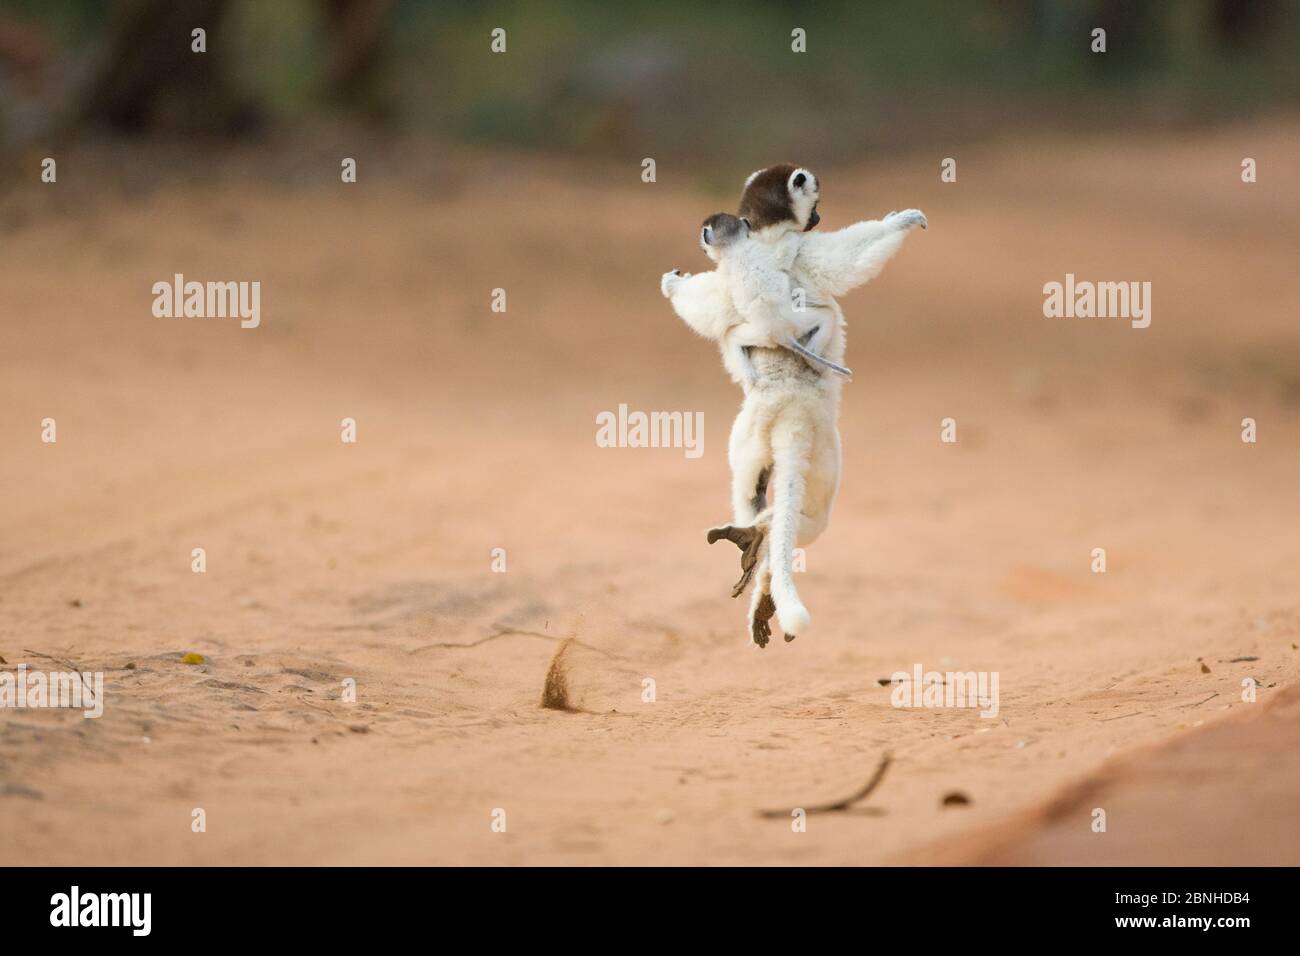 Verreaux's sifaka (Propithecus verreauxi) mother with infant dancing across open ground, Berenty Private Reserve, Madagascar. Stock Photo